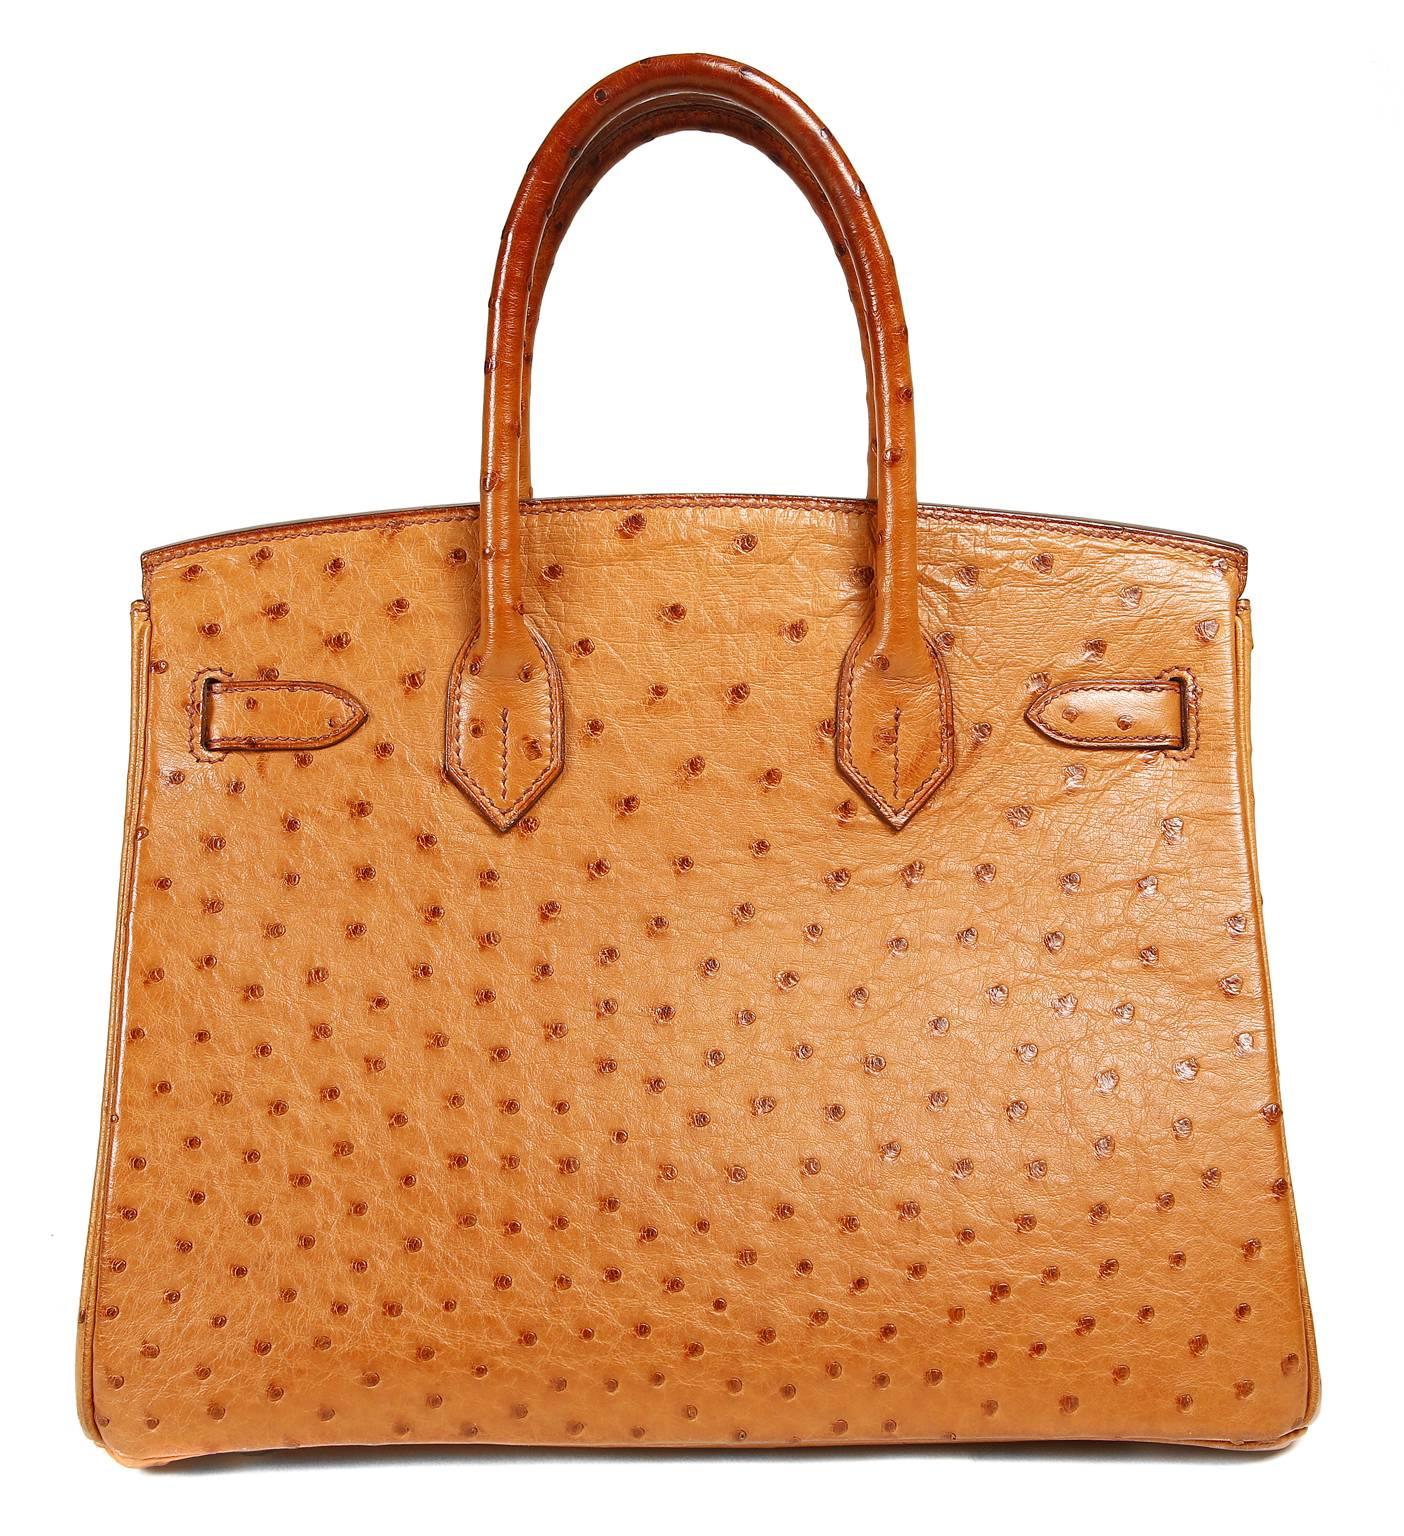 Hermès Saffron Ostrich 30 cm Birkin Bag- PRISTINE 
 Hermès bags are considered the ultimate luxury item the world over.  Hand stitched by skilled craftsmen, wait lists of a year or more are commonplace.  This particular Birkin is in exotic